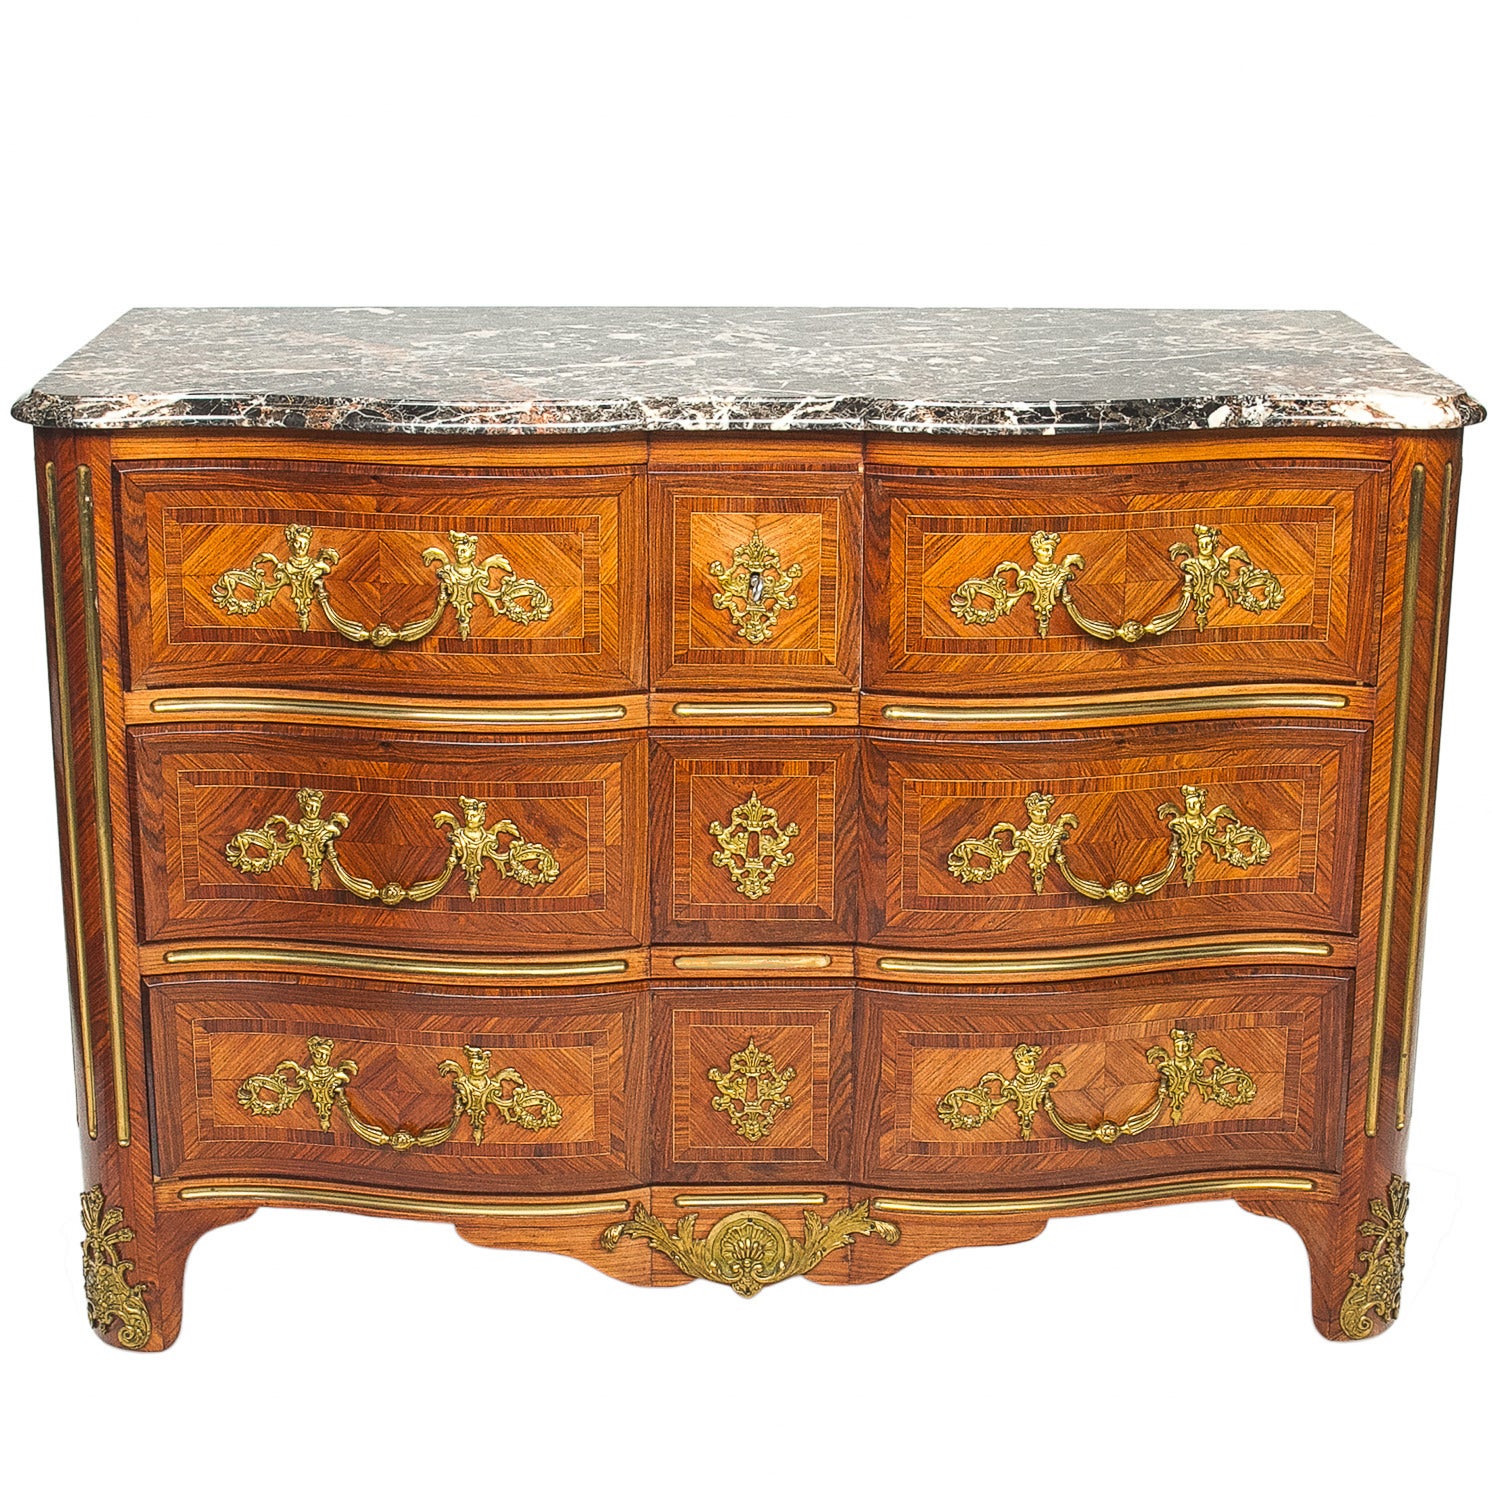 Late 19th Century Regencé Marble-Top Commode